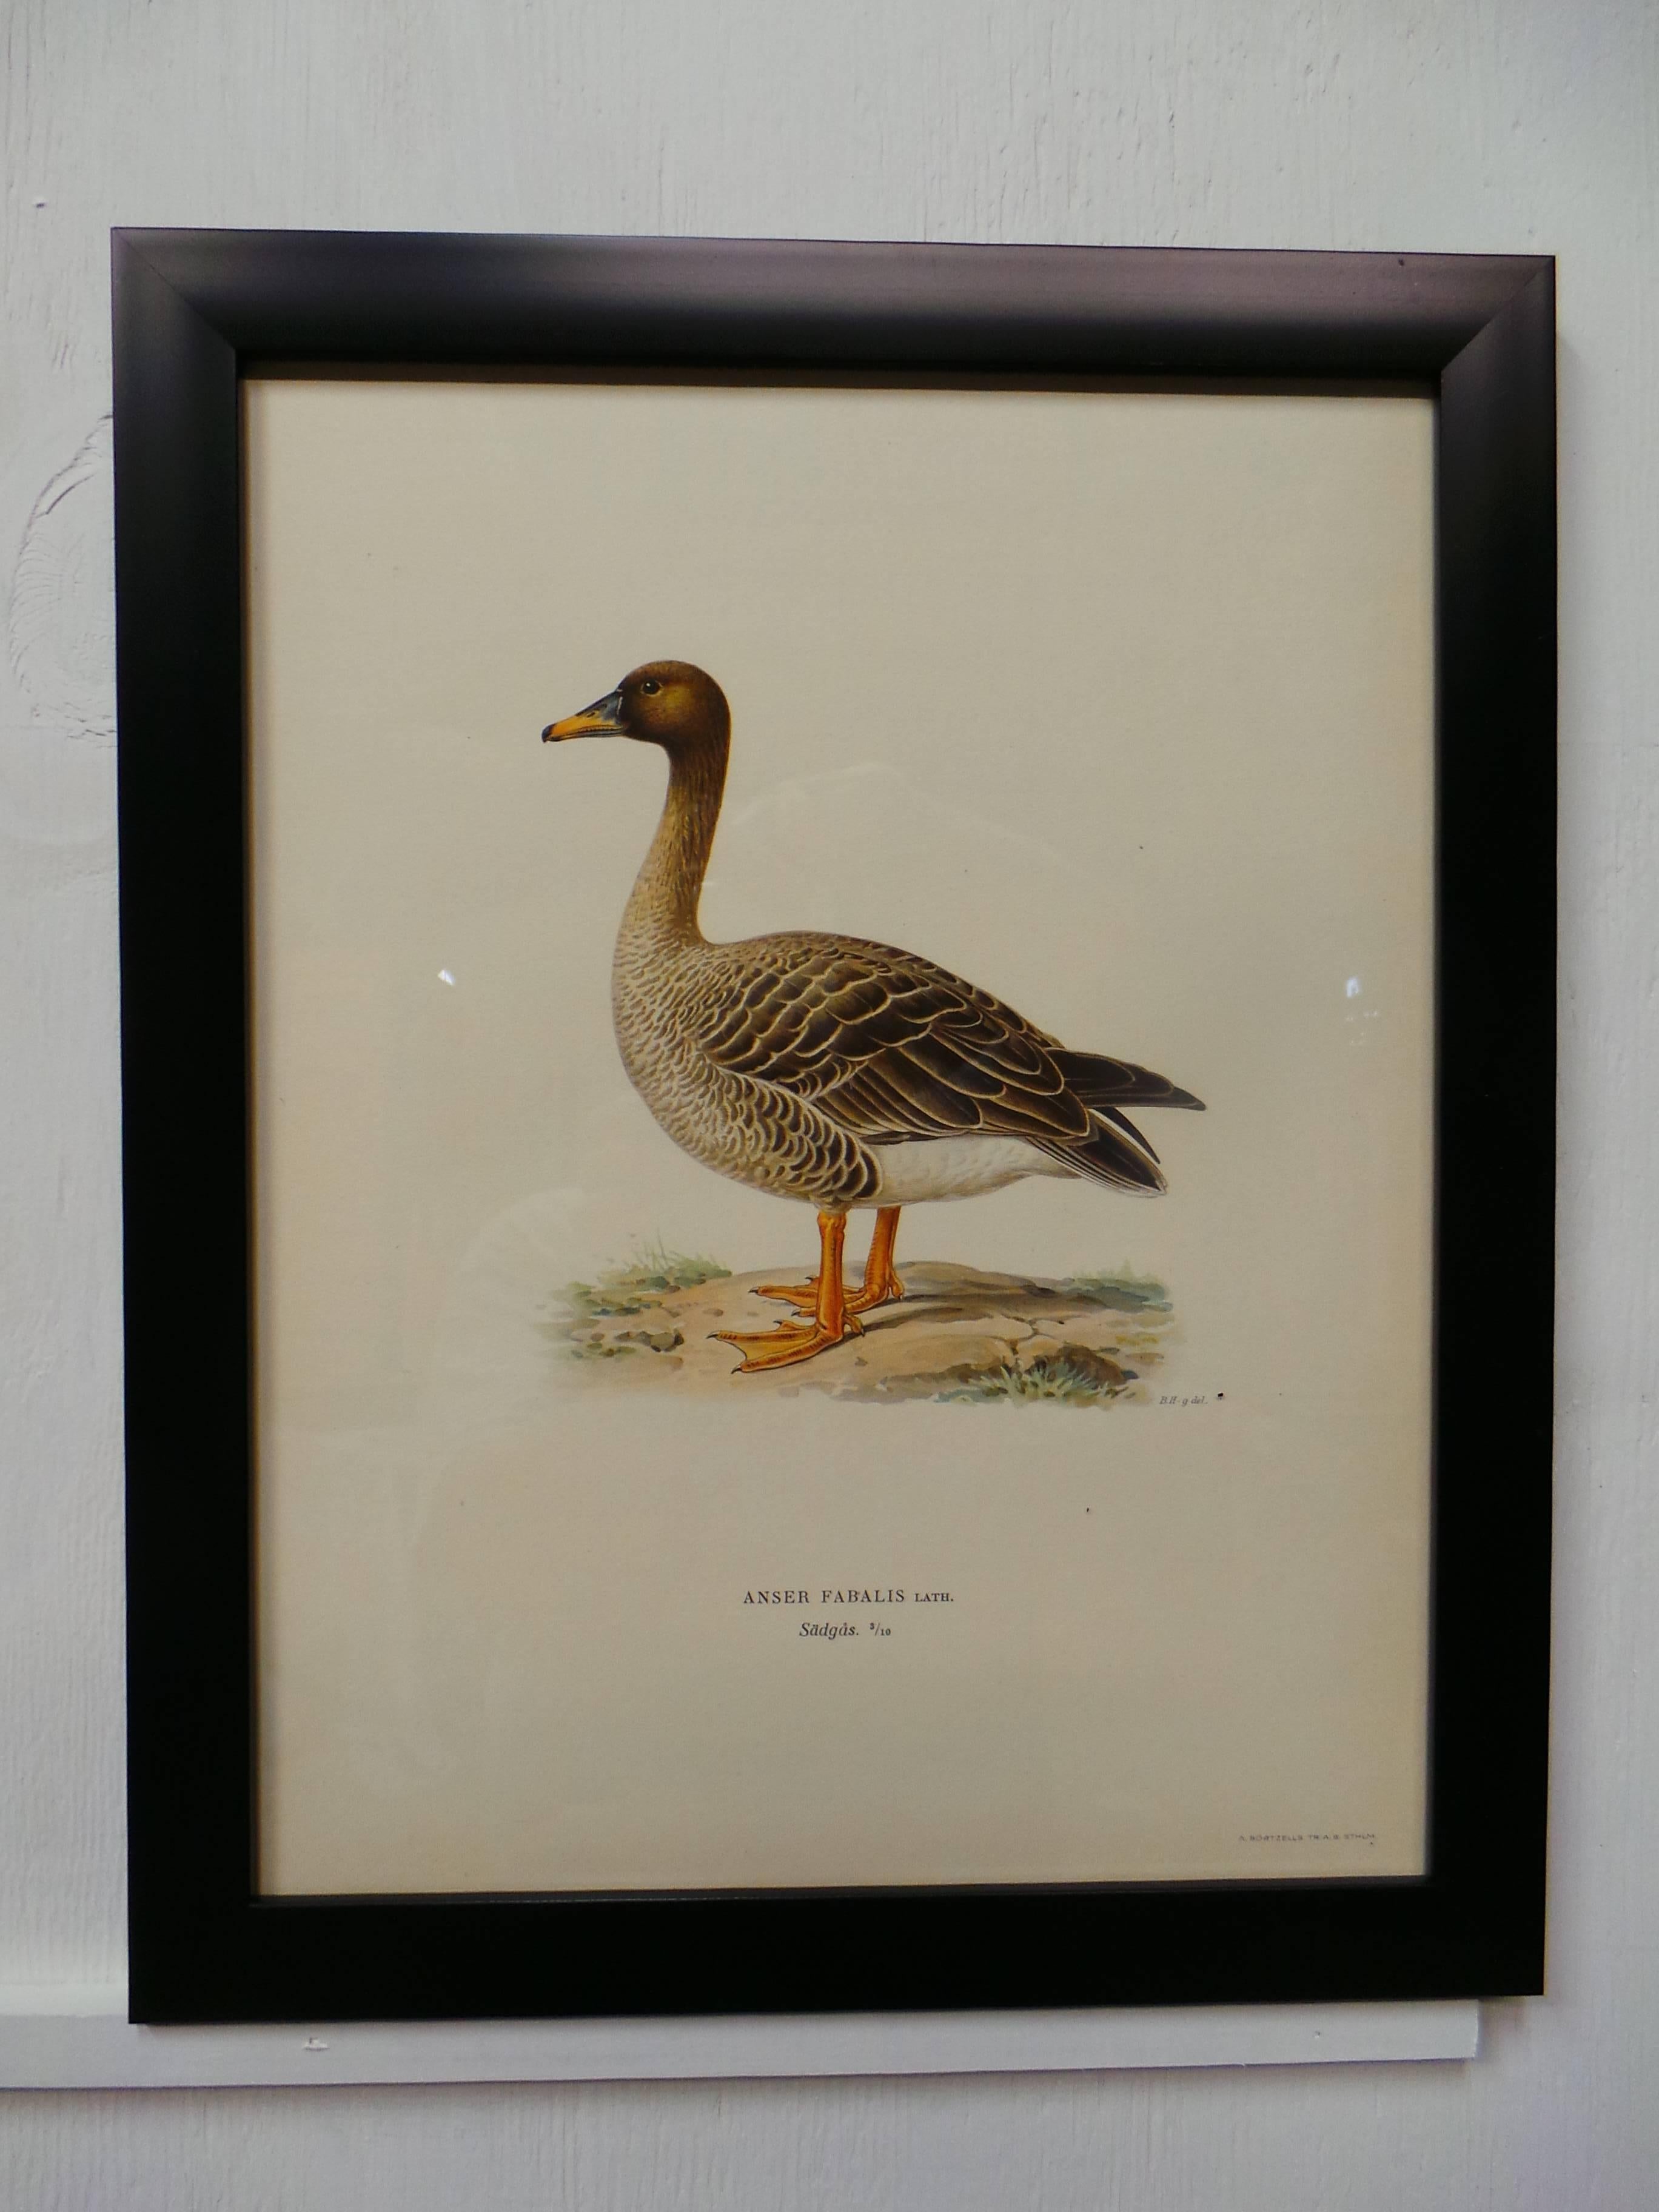 Swedish Waterfowl Prints, circa 1929 In Excellent Condition For Sale In Hollywood, FL